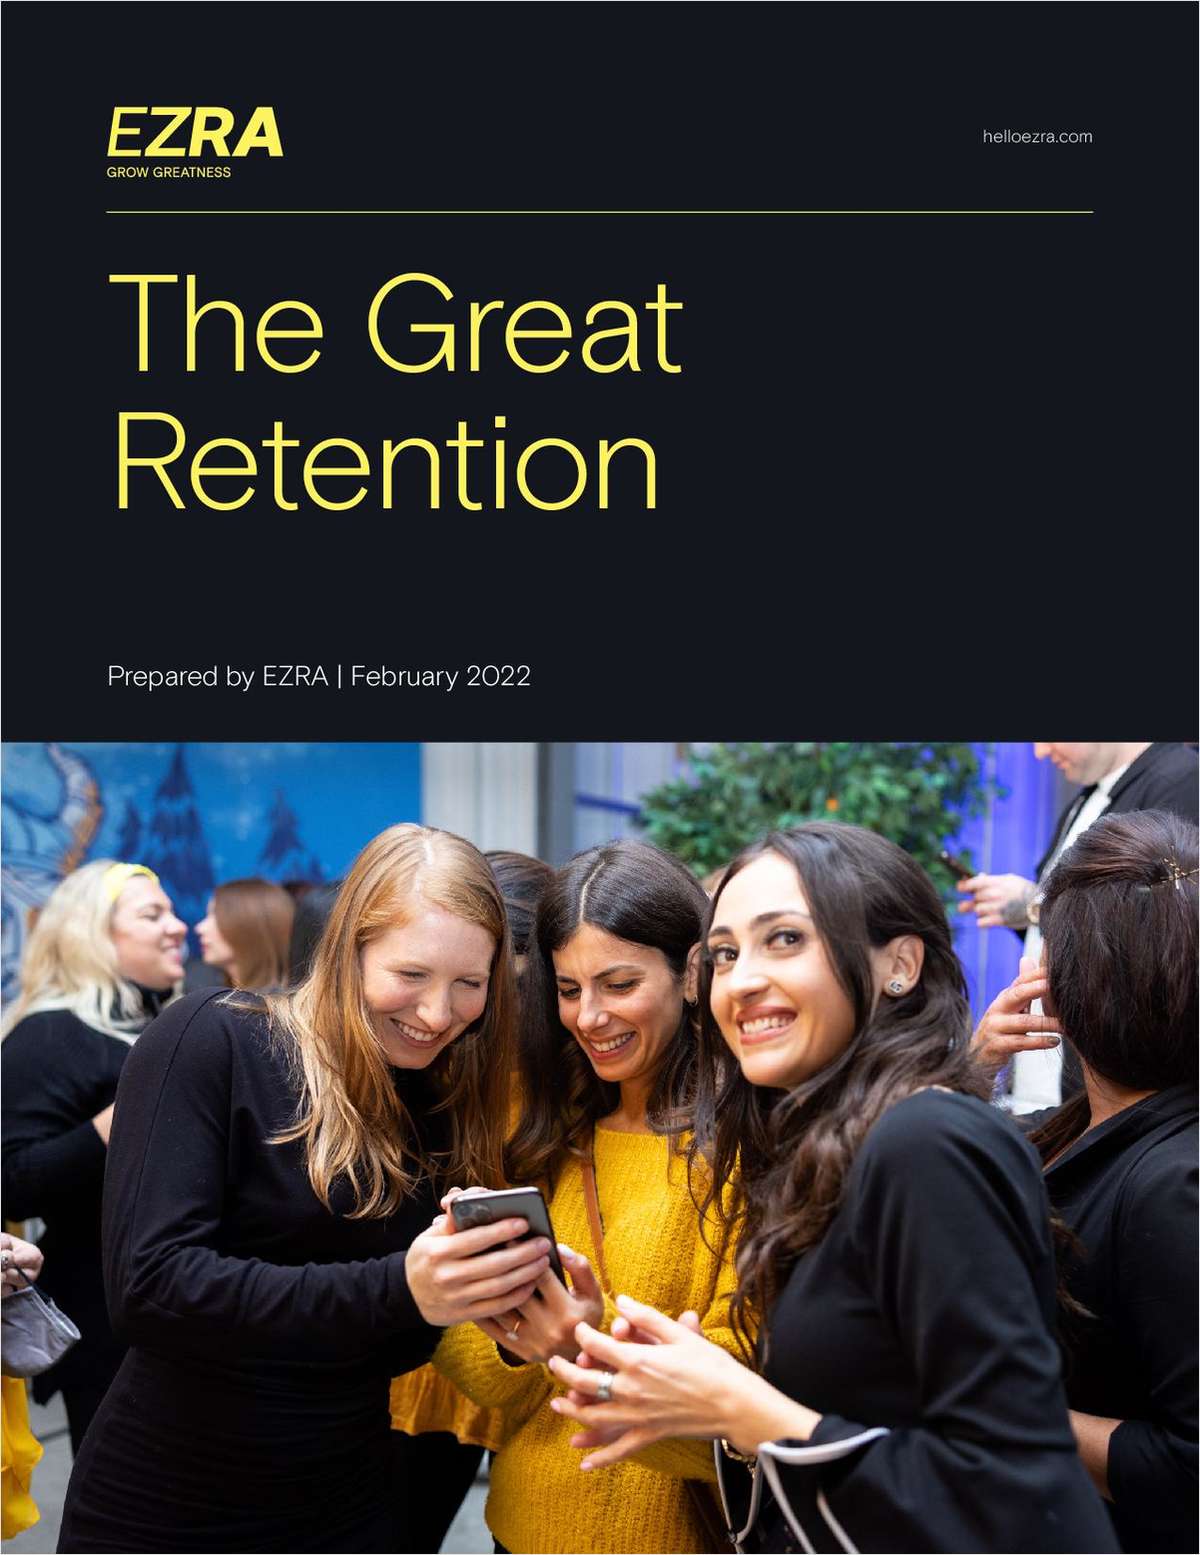 The Great Retention